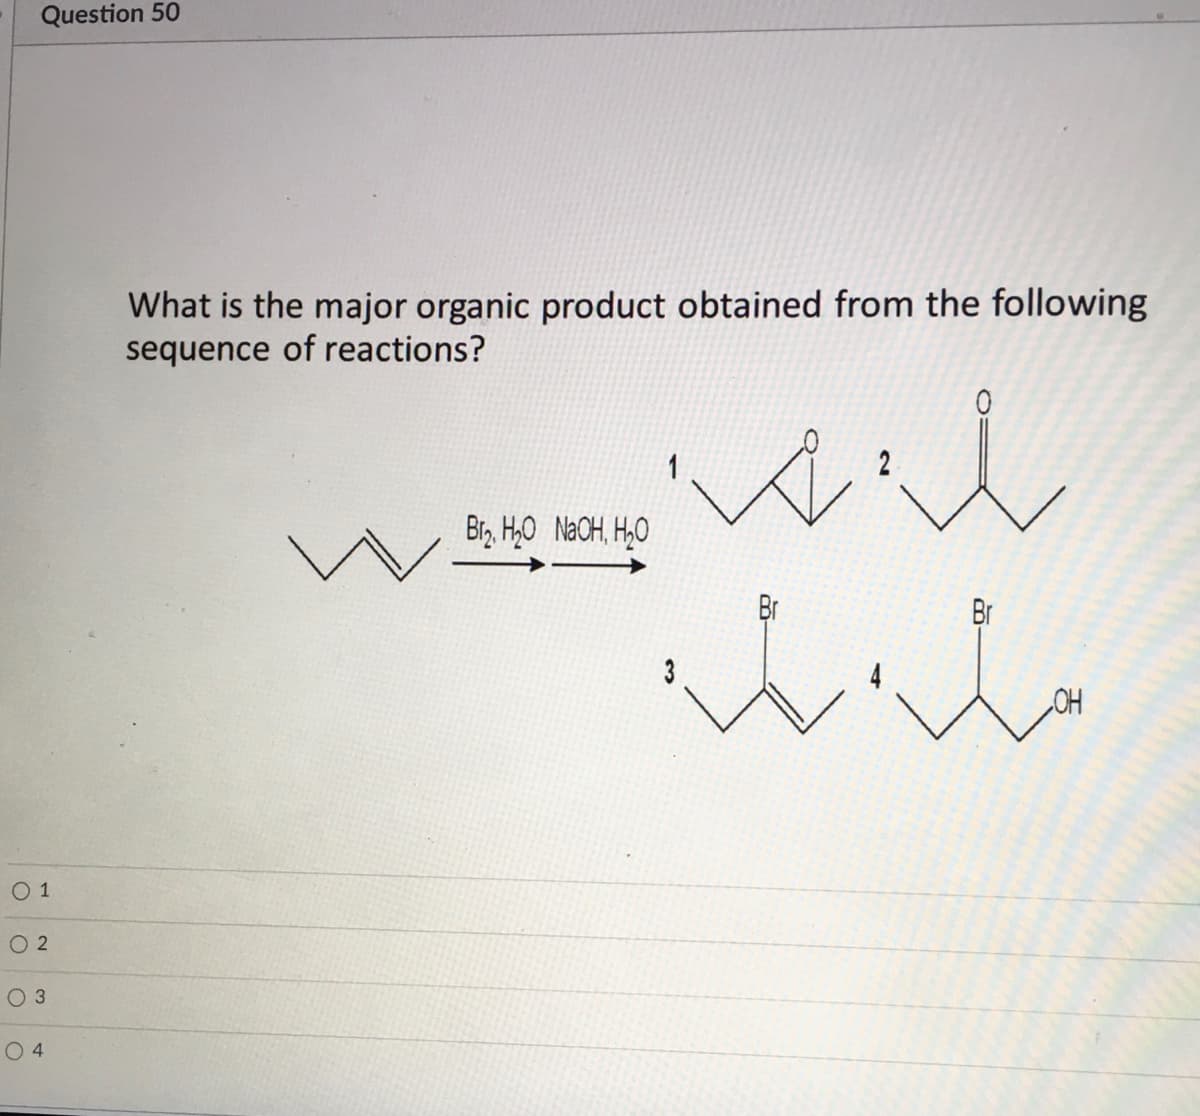 Question 50
What is the major organic product obtained from the following
sequence of reactions?
wil
1
Br, H,0 NaCH, H,0
Br
Br
3
CH
О1
O 2
O 3
O 4
